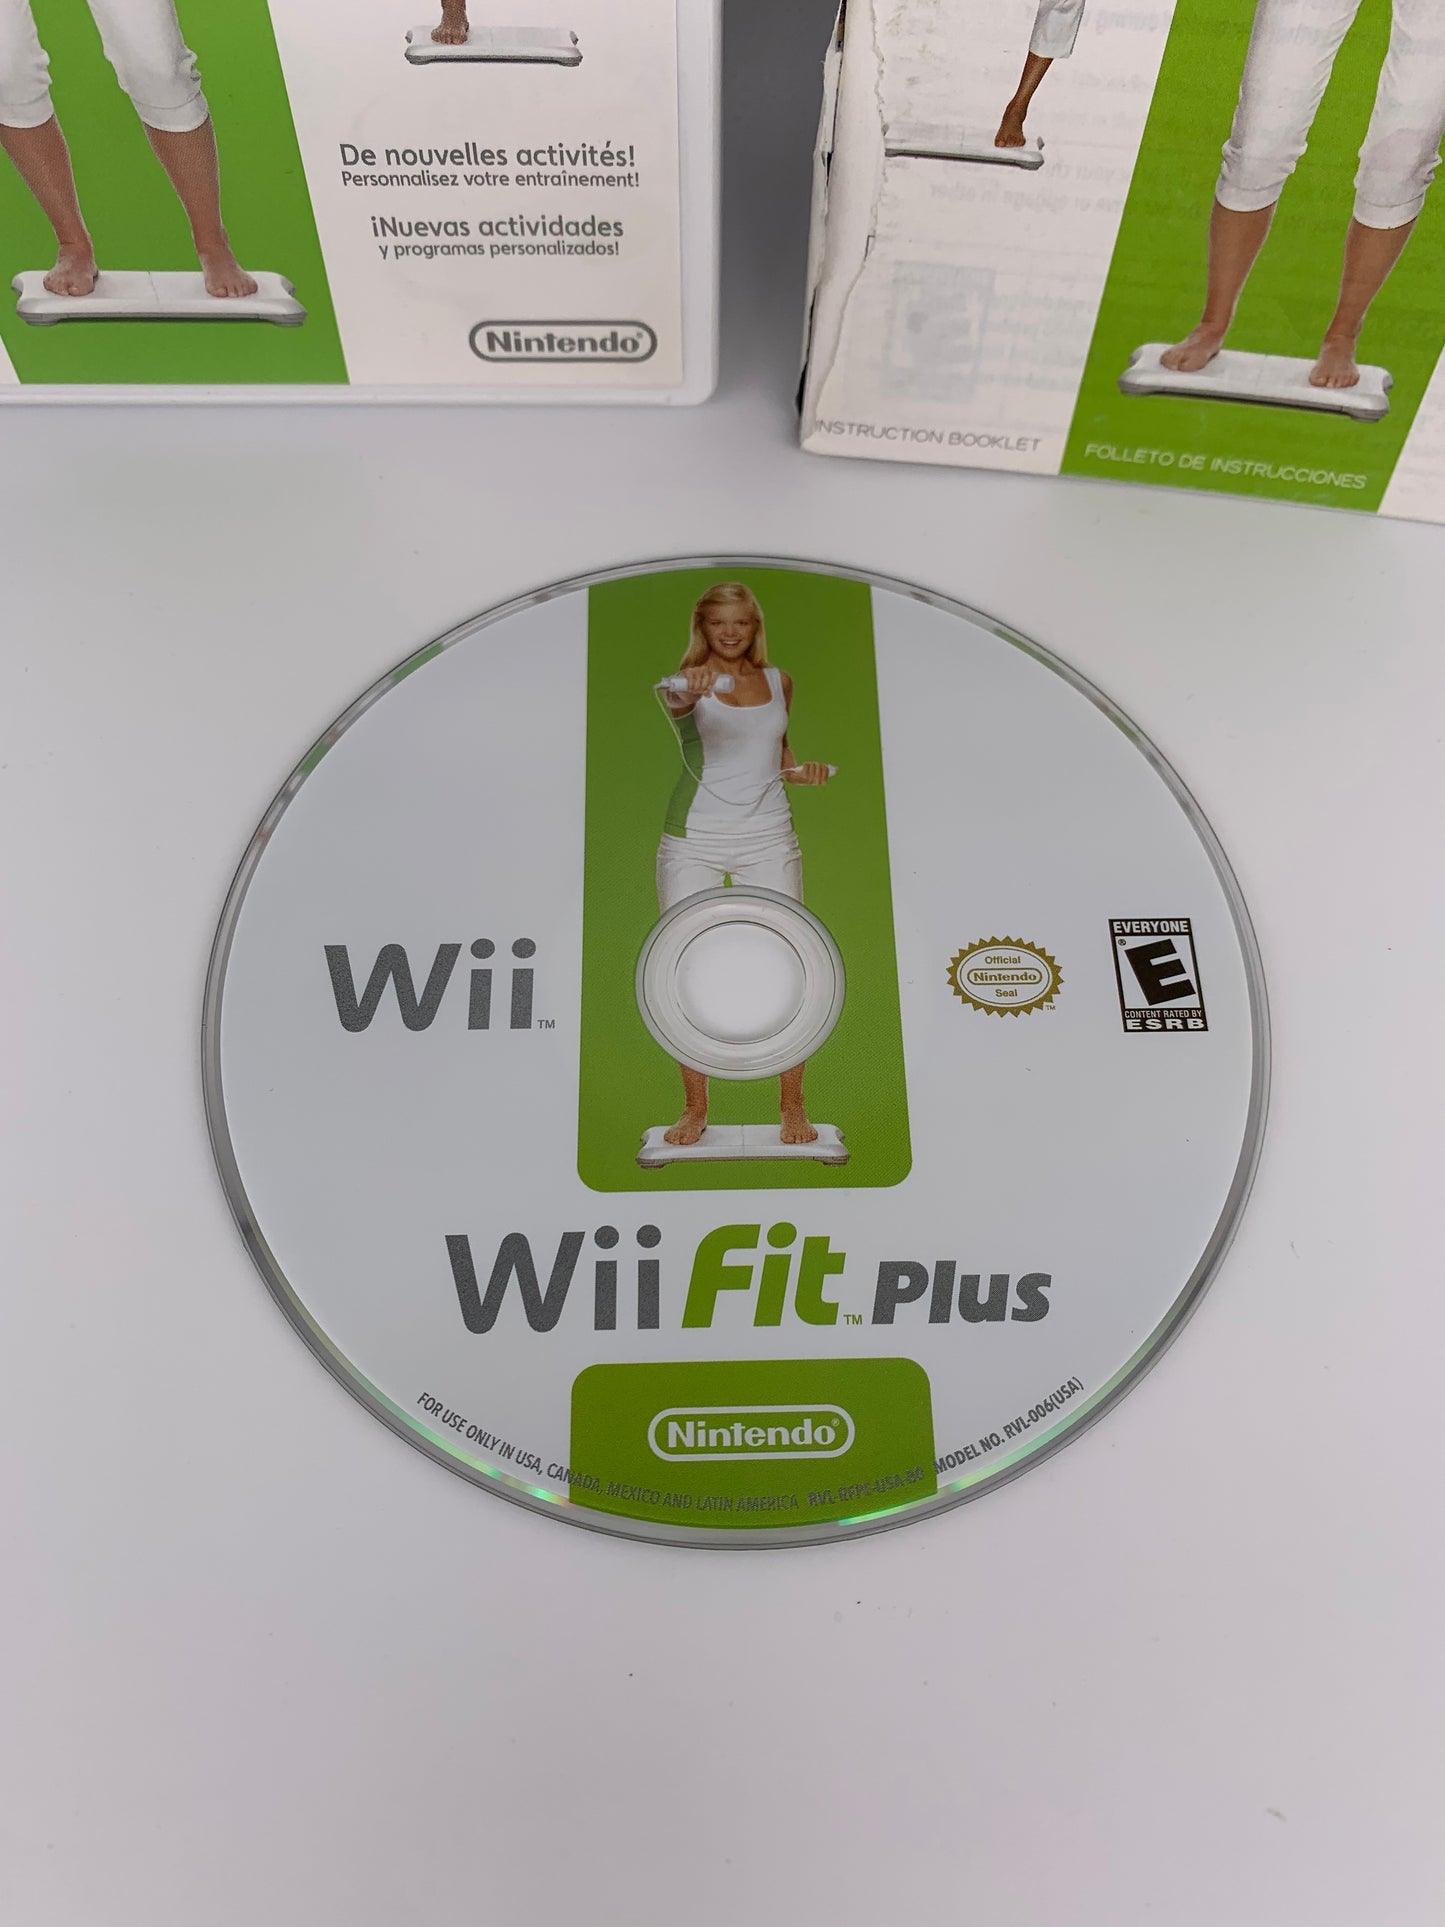 NiNTENDO Wii | WiiFiT PLUS | NOT FOR RESALE